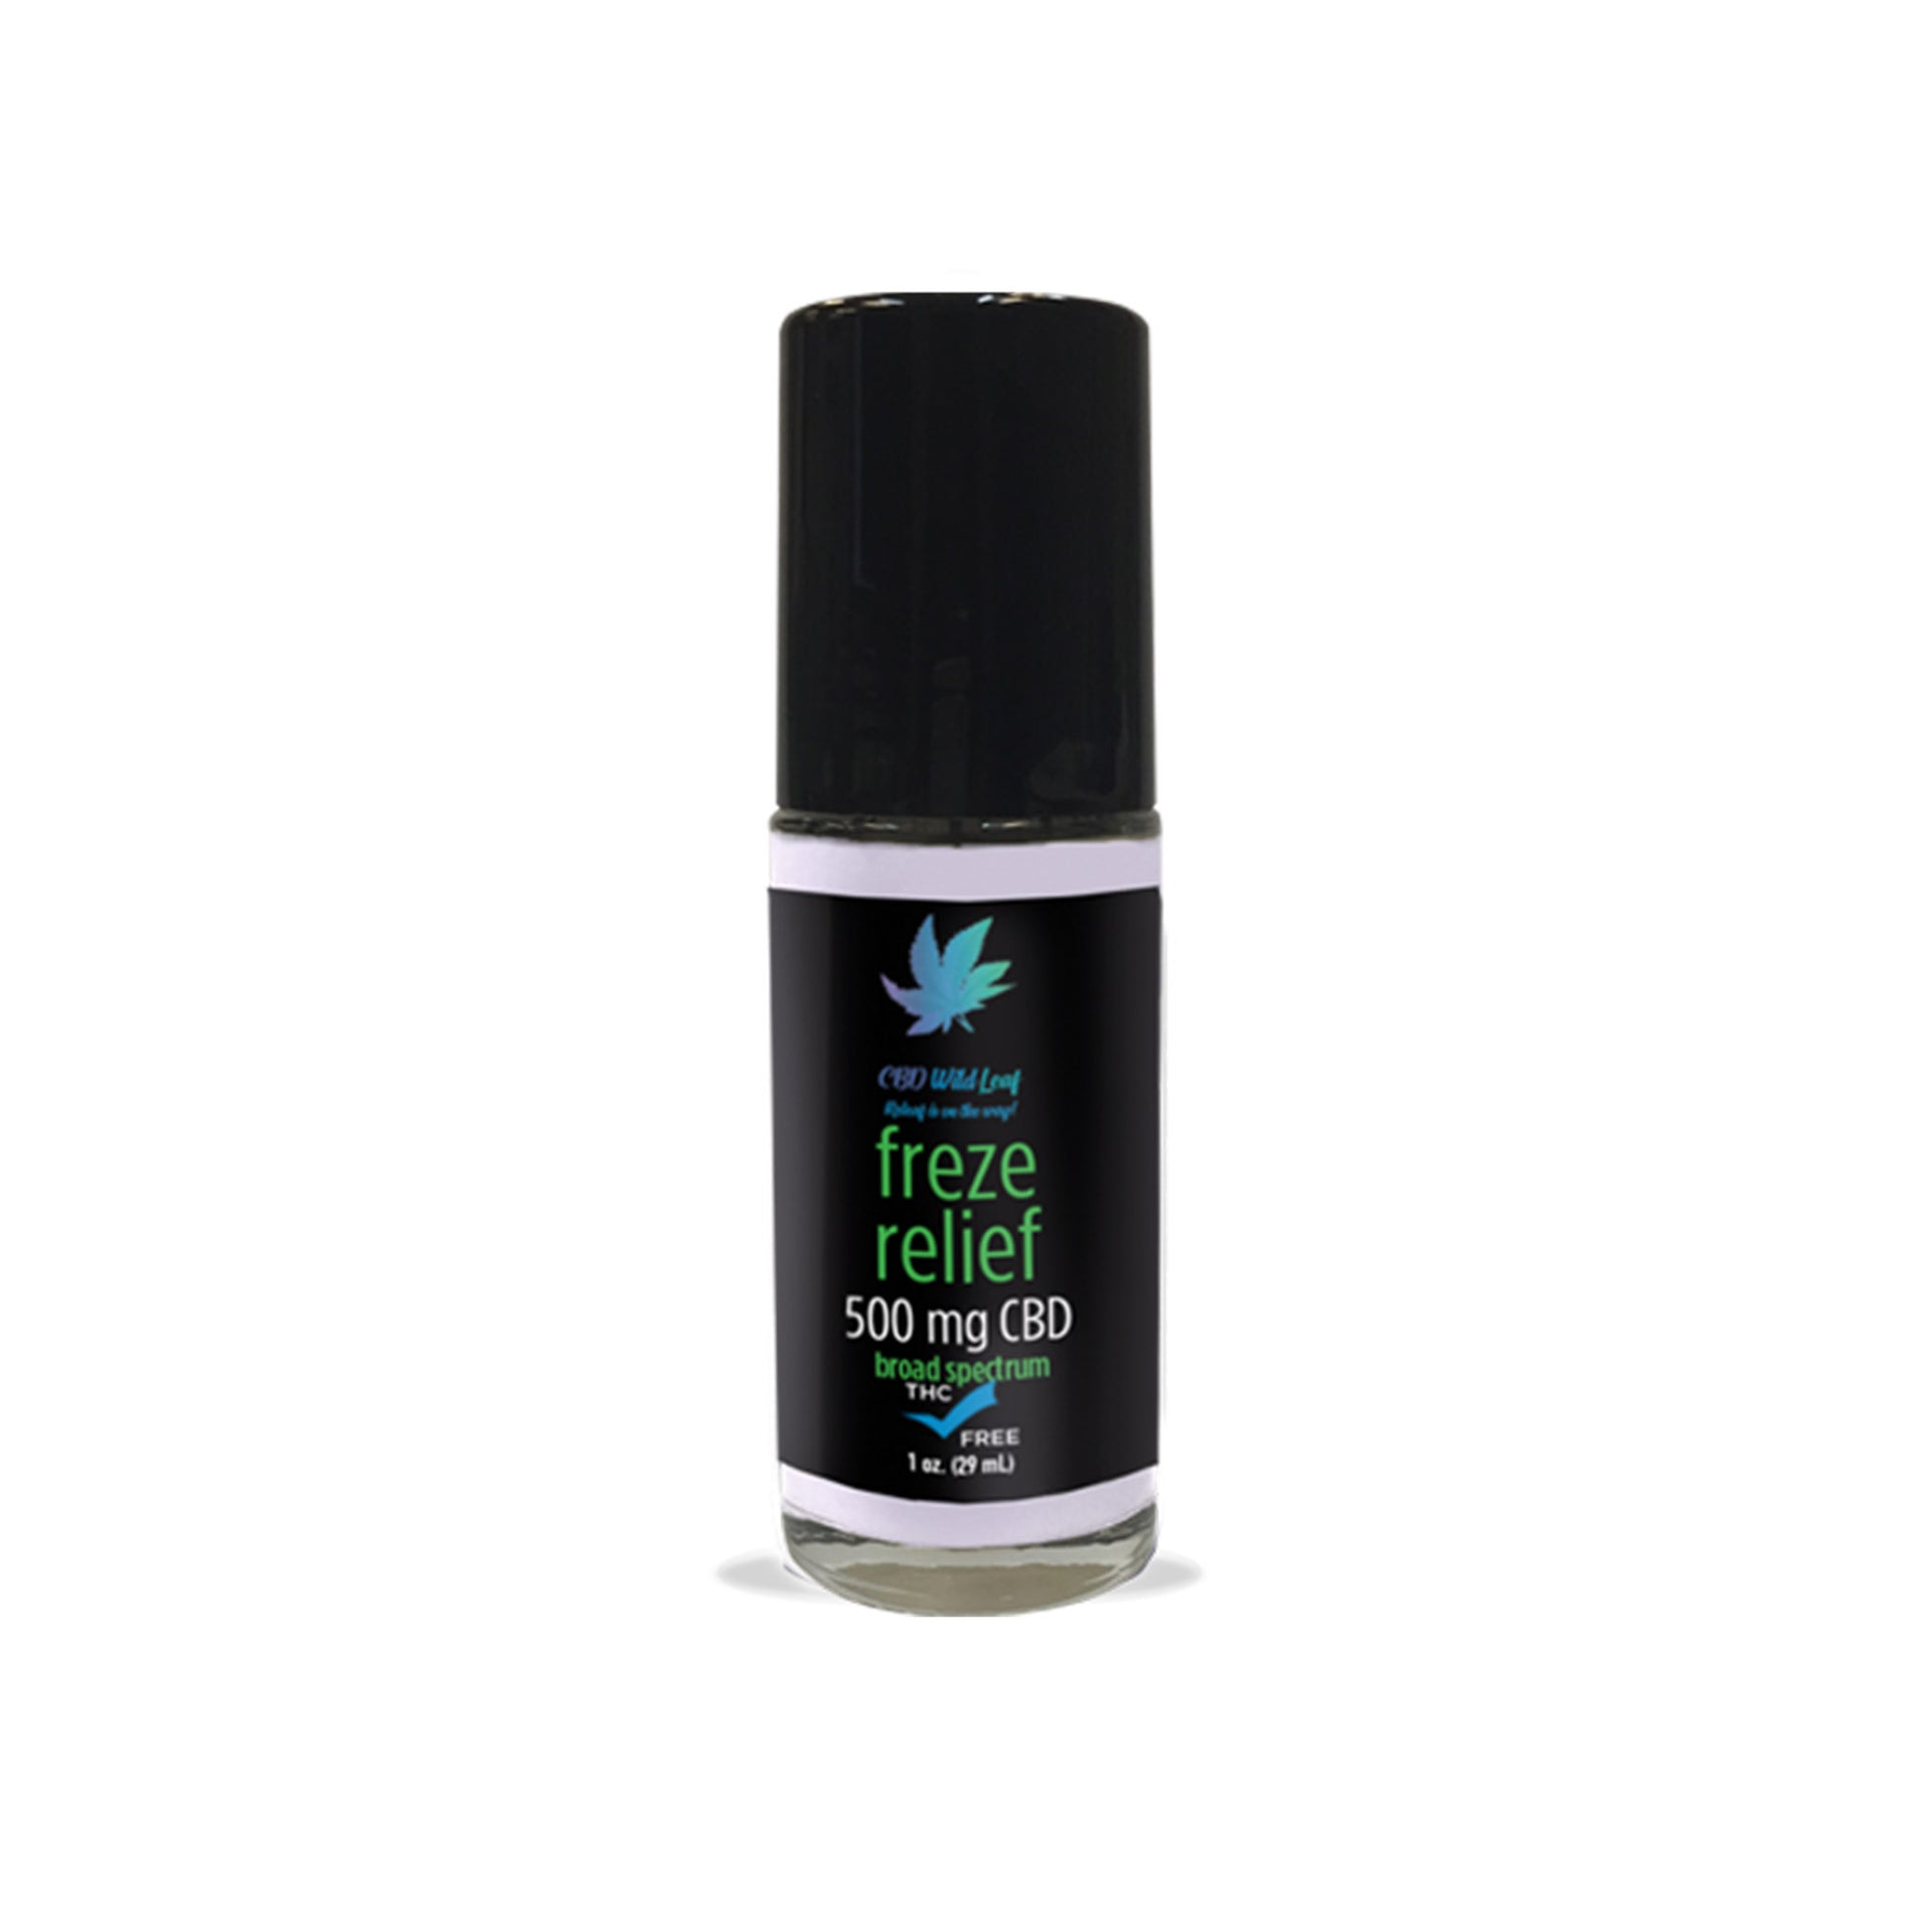 Product Photo of CBD Wild Leaf's Freze Relief 500mg Roll On on white background